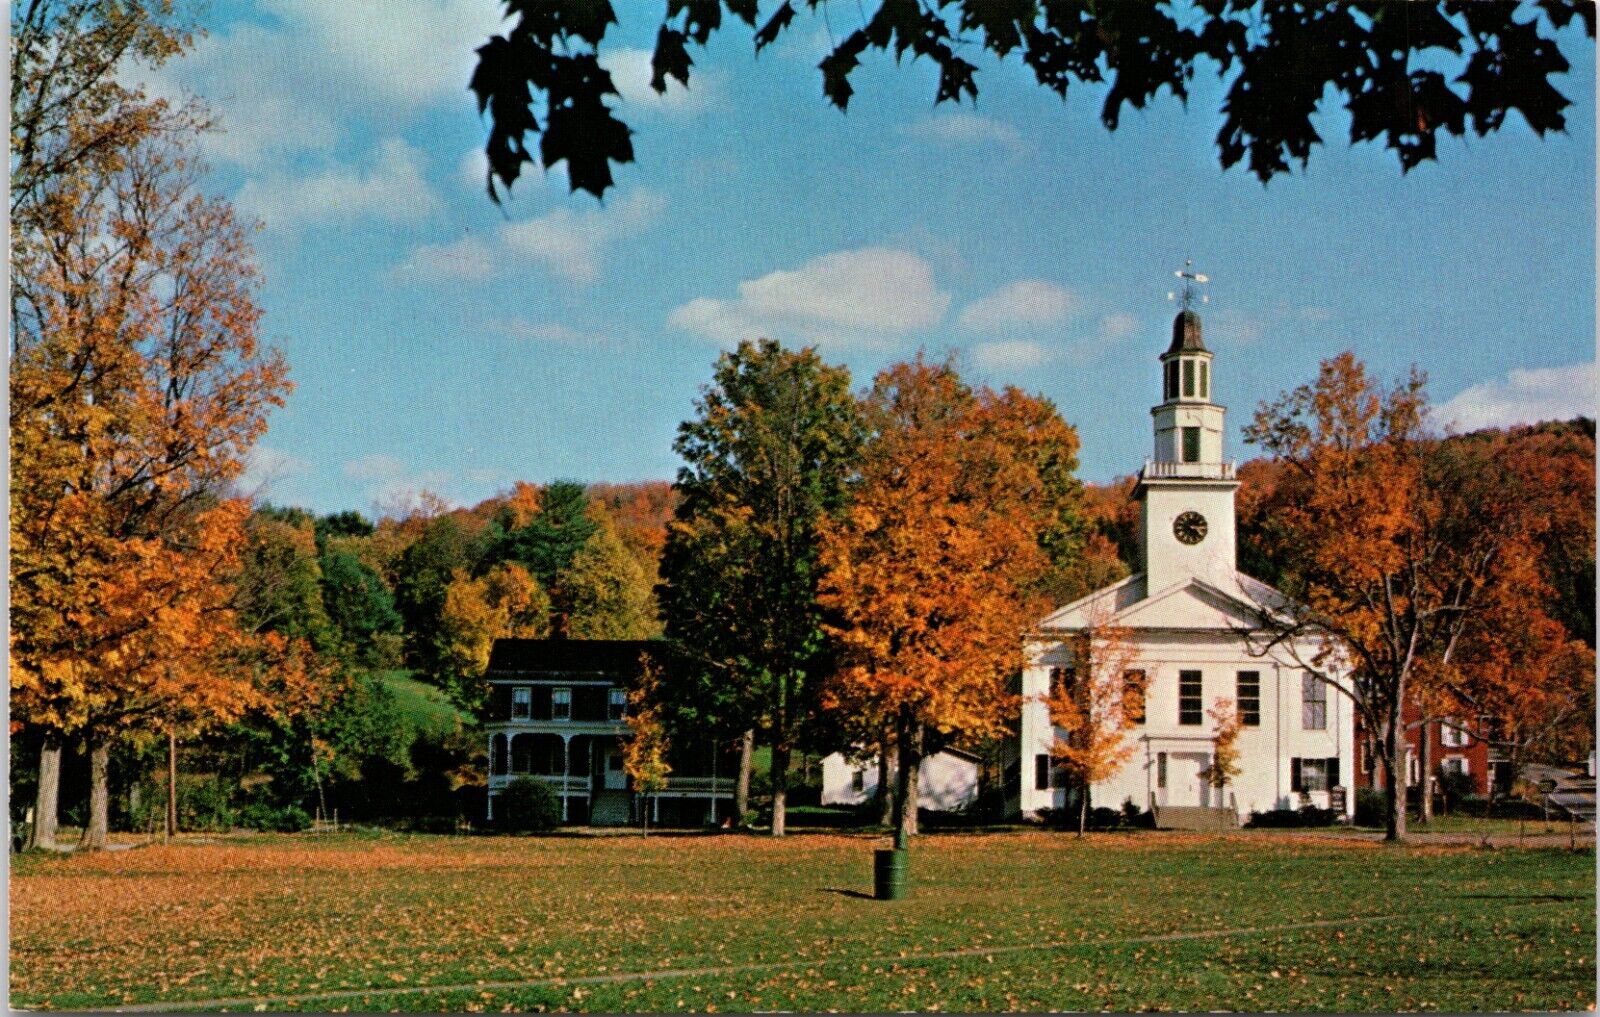 Chelsea VT Common Building Clock Tower Autumn Fall Leaves Vermont Postcard A51